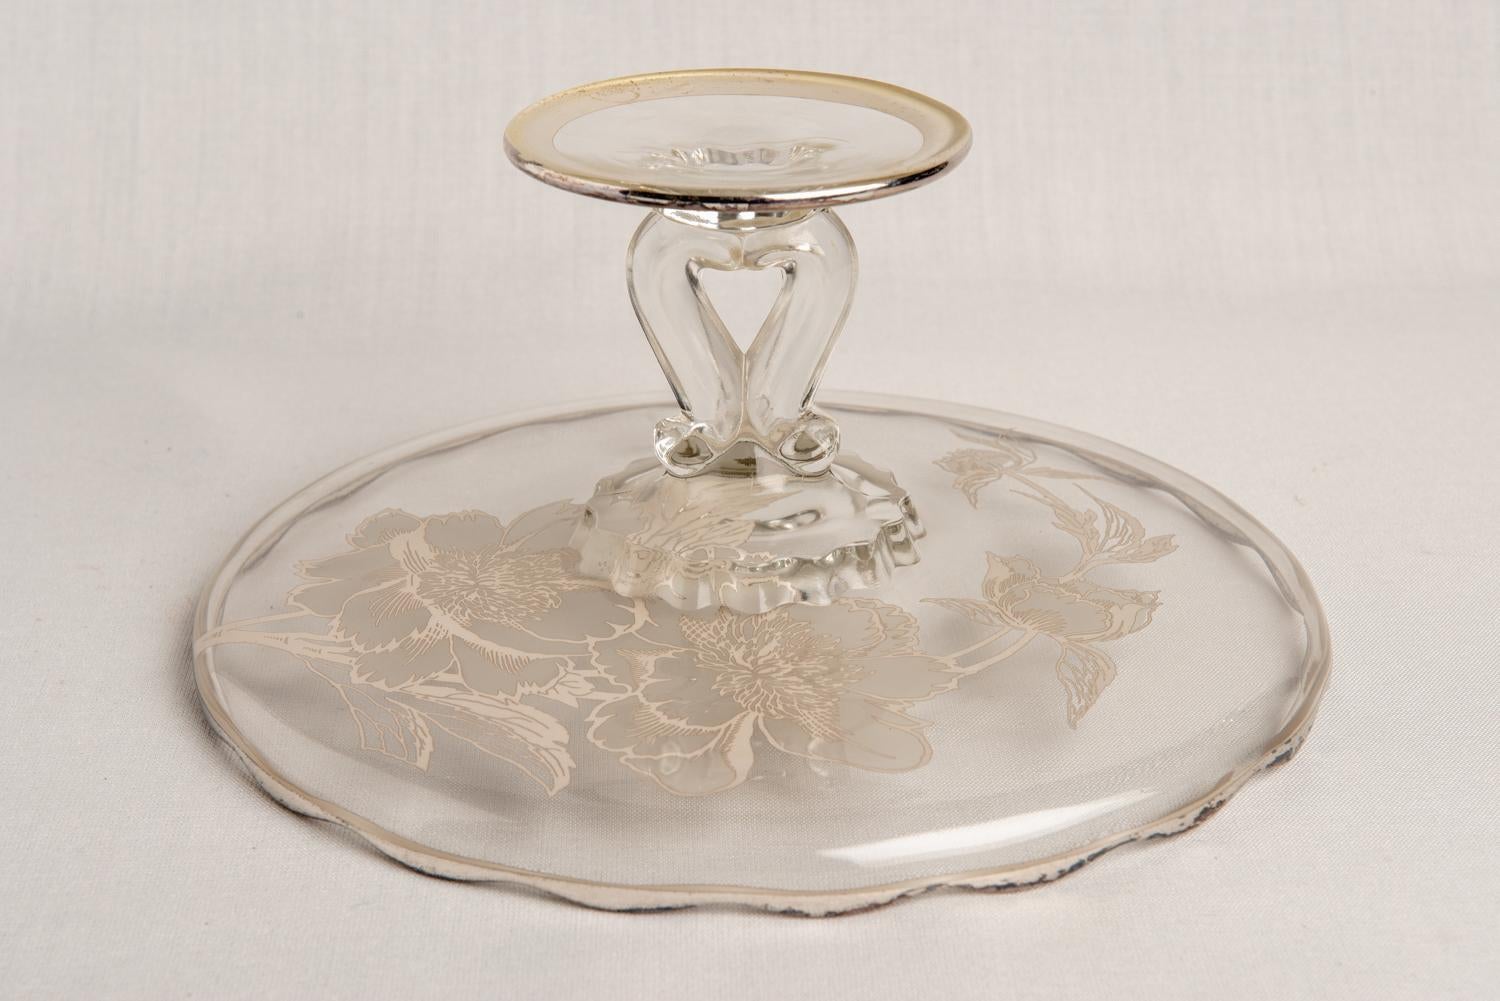 20th Century Pedestal Overlay Glass Patisserie Stand For Sale